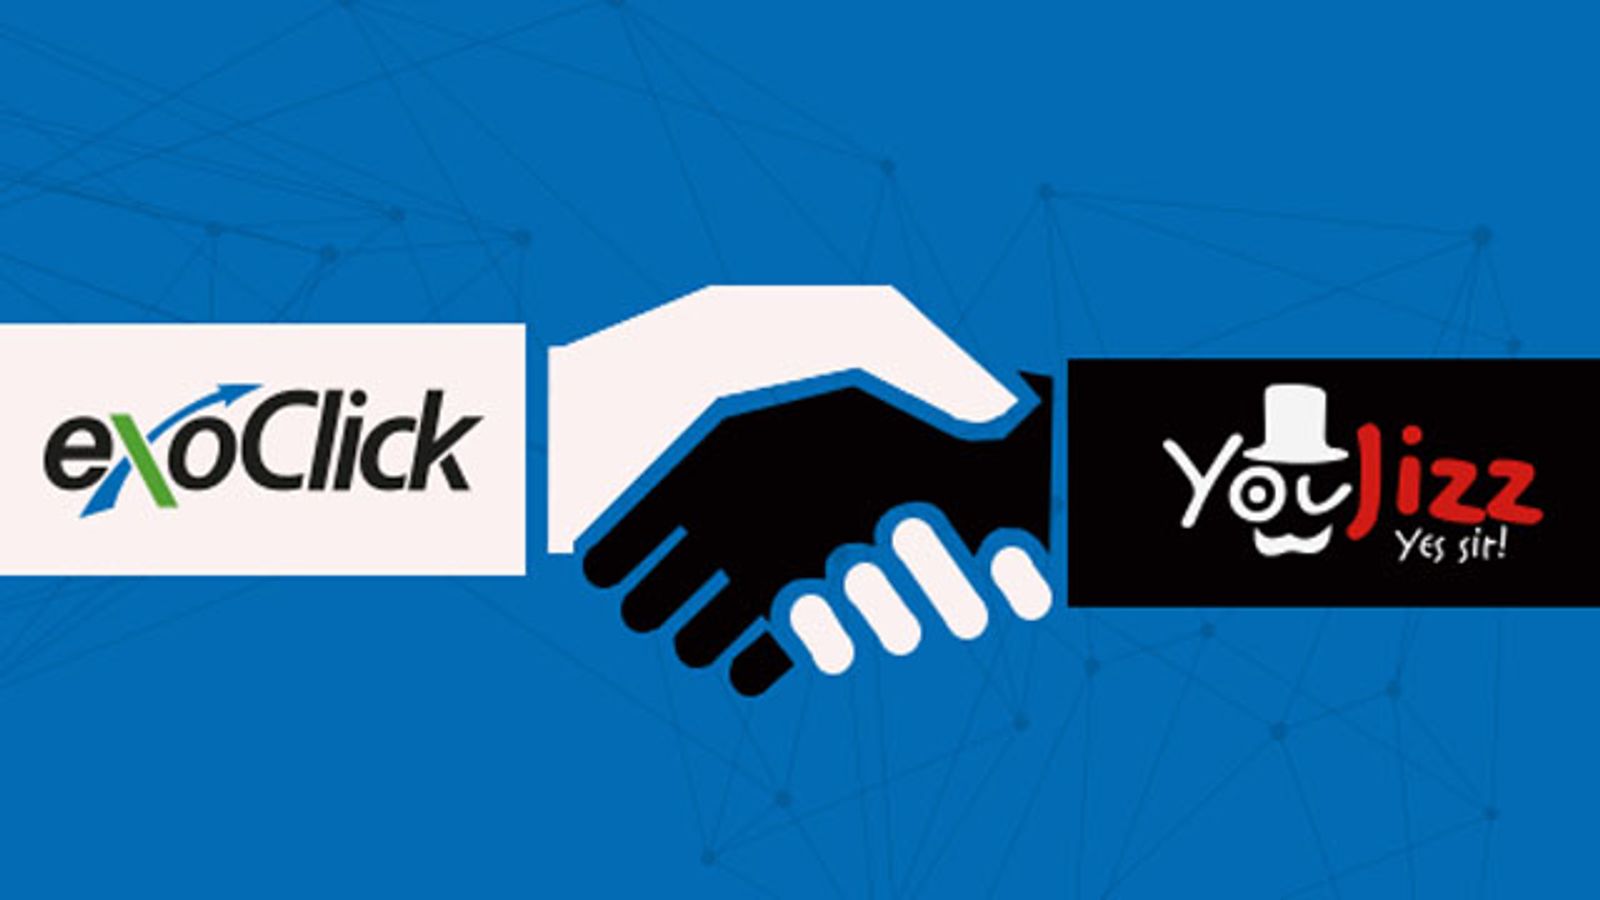 ExoClick signs exclusive global agreement with YouJizz.com